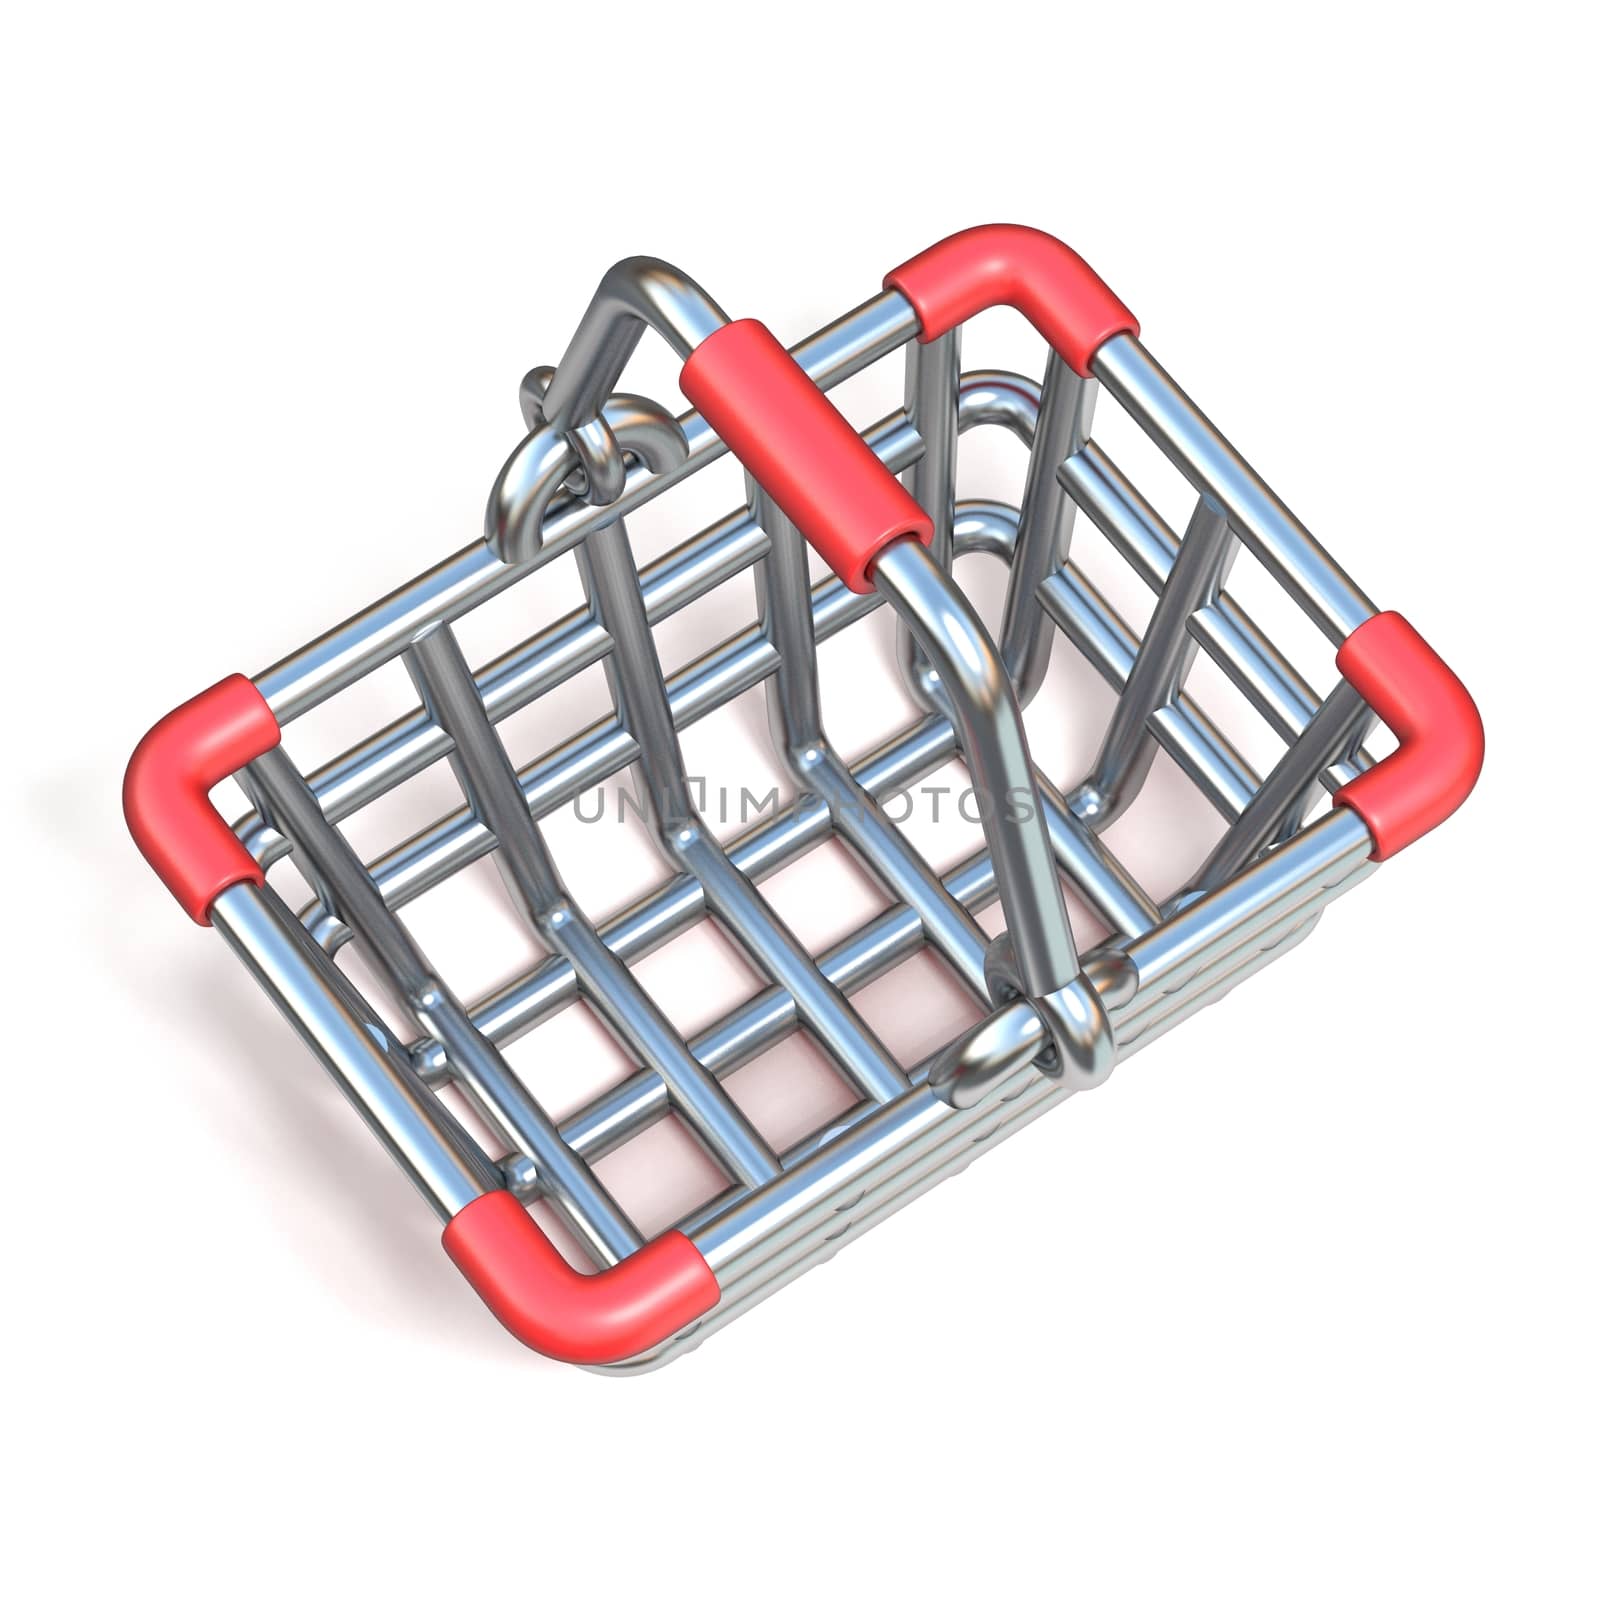 Steel wire shopping basket cartoon icon 3D render illustration isolated on white background